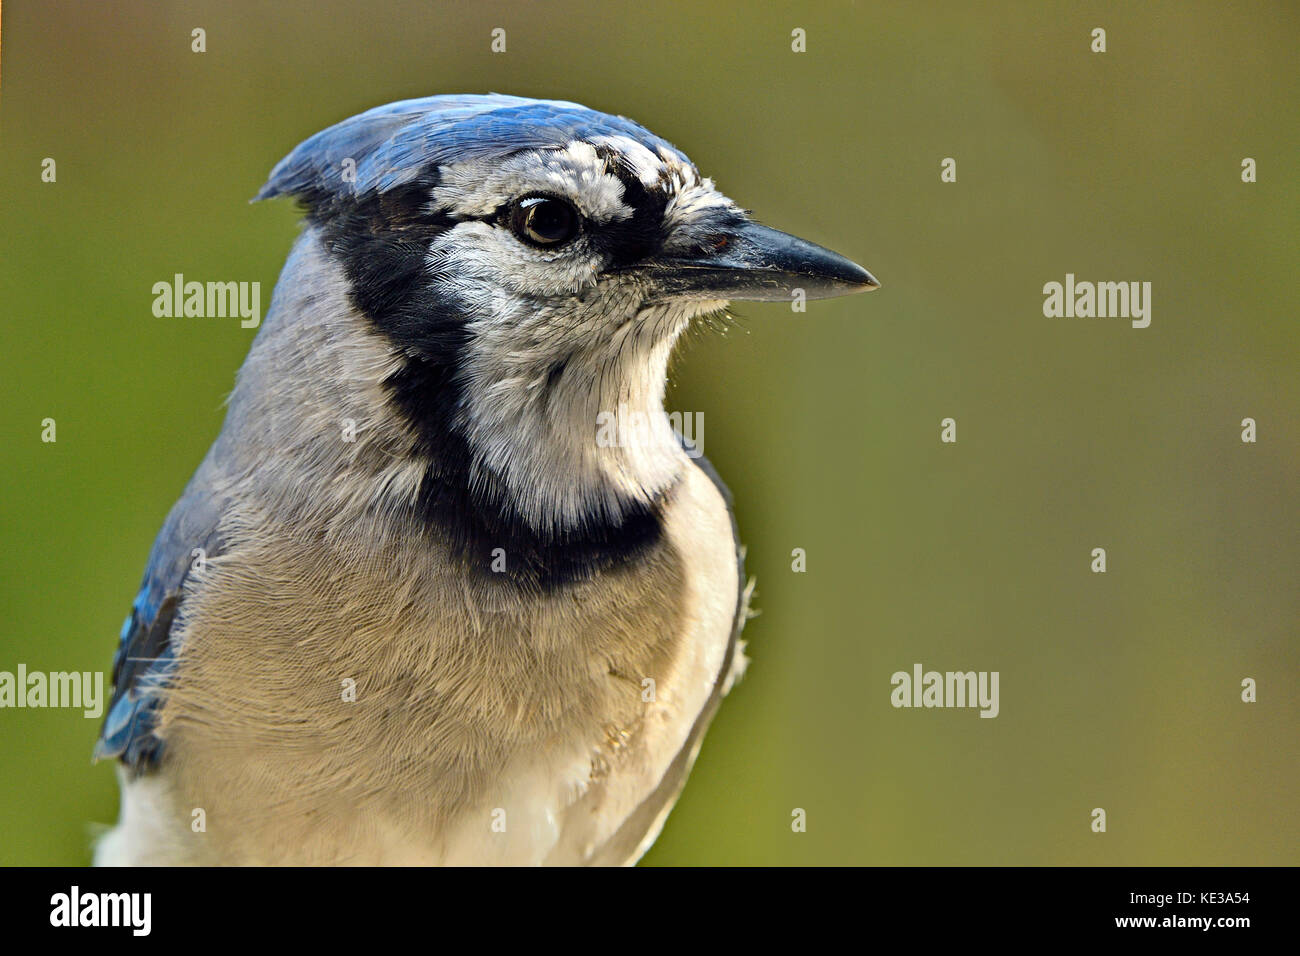 A close up side view of a wild Eastern Blue Jay Stock Photo